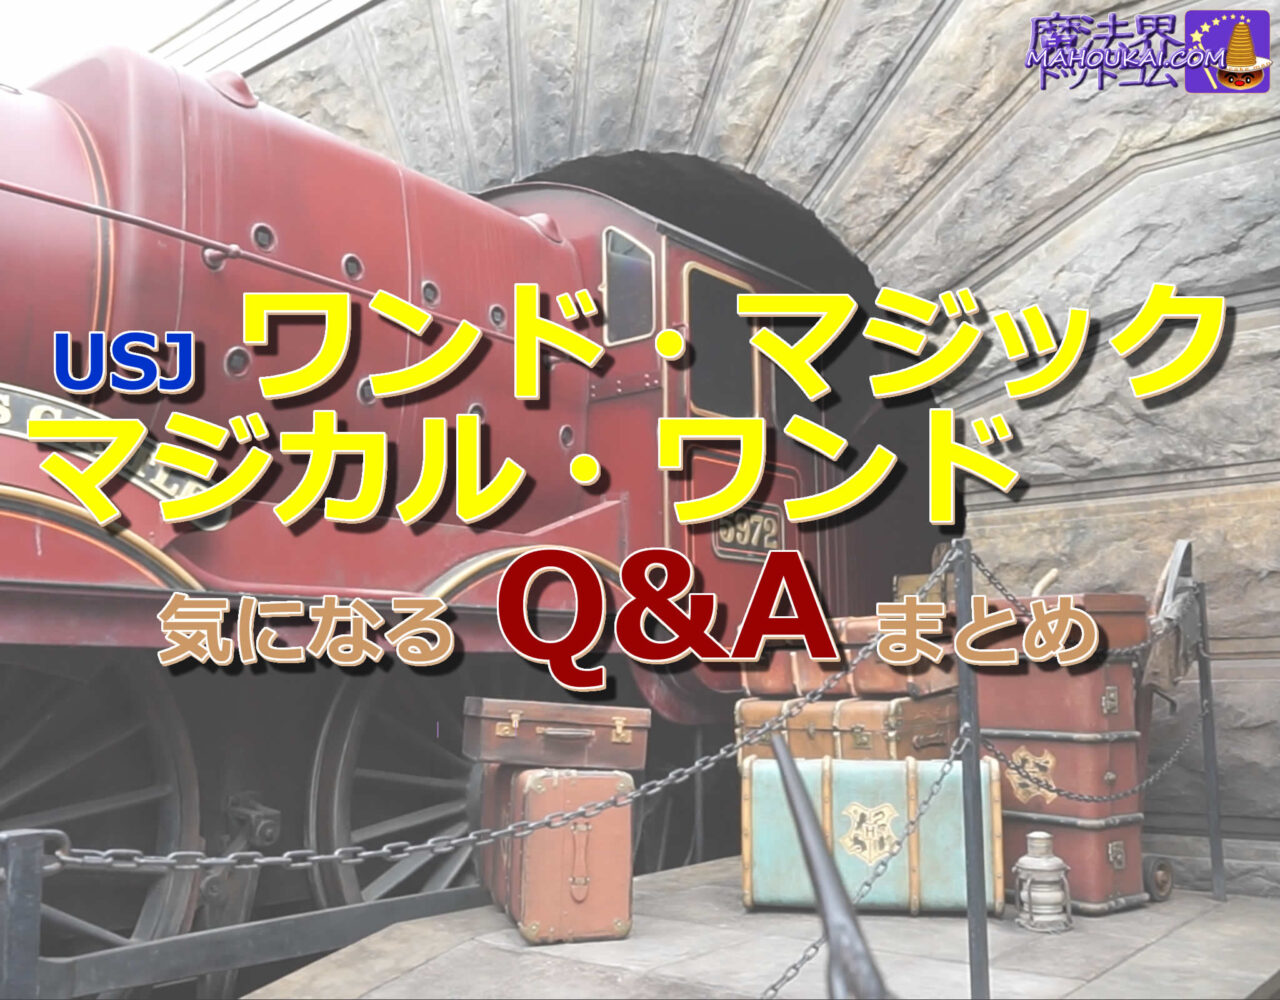 4.Questions Wand Magic (Magic Wands: Magical Wands) Questions Summary *Is it safe to borrow and lend wands? etc. (USJ Harry Potter area)